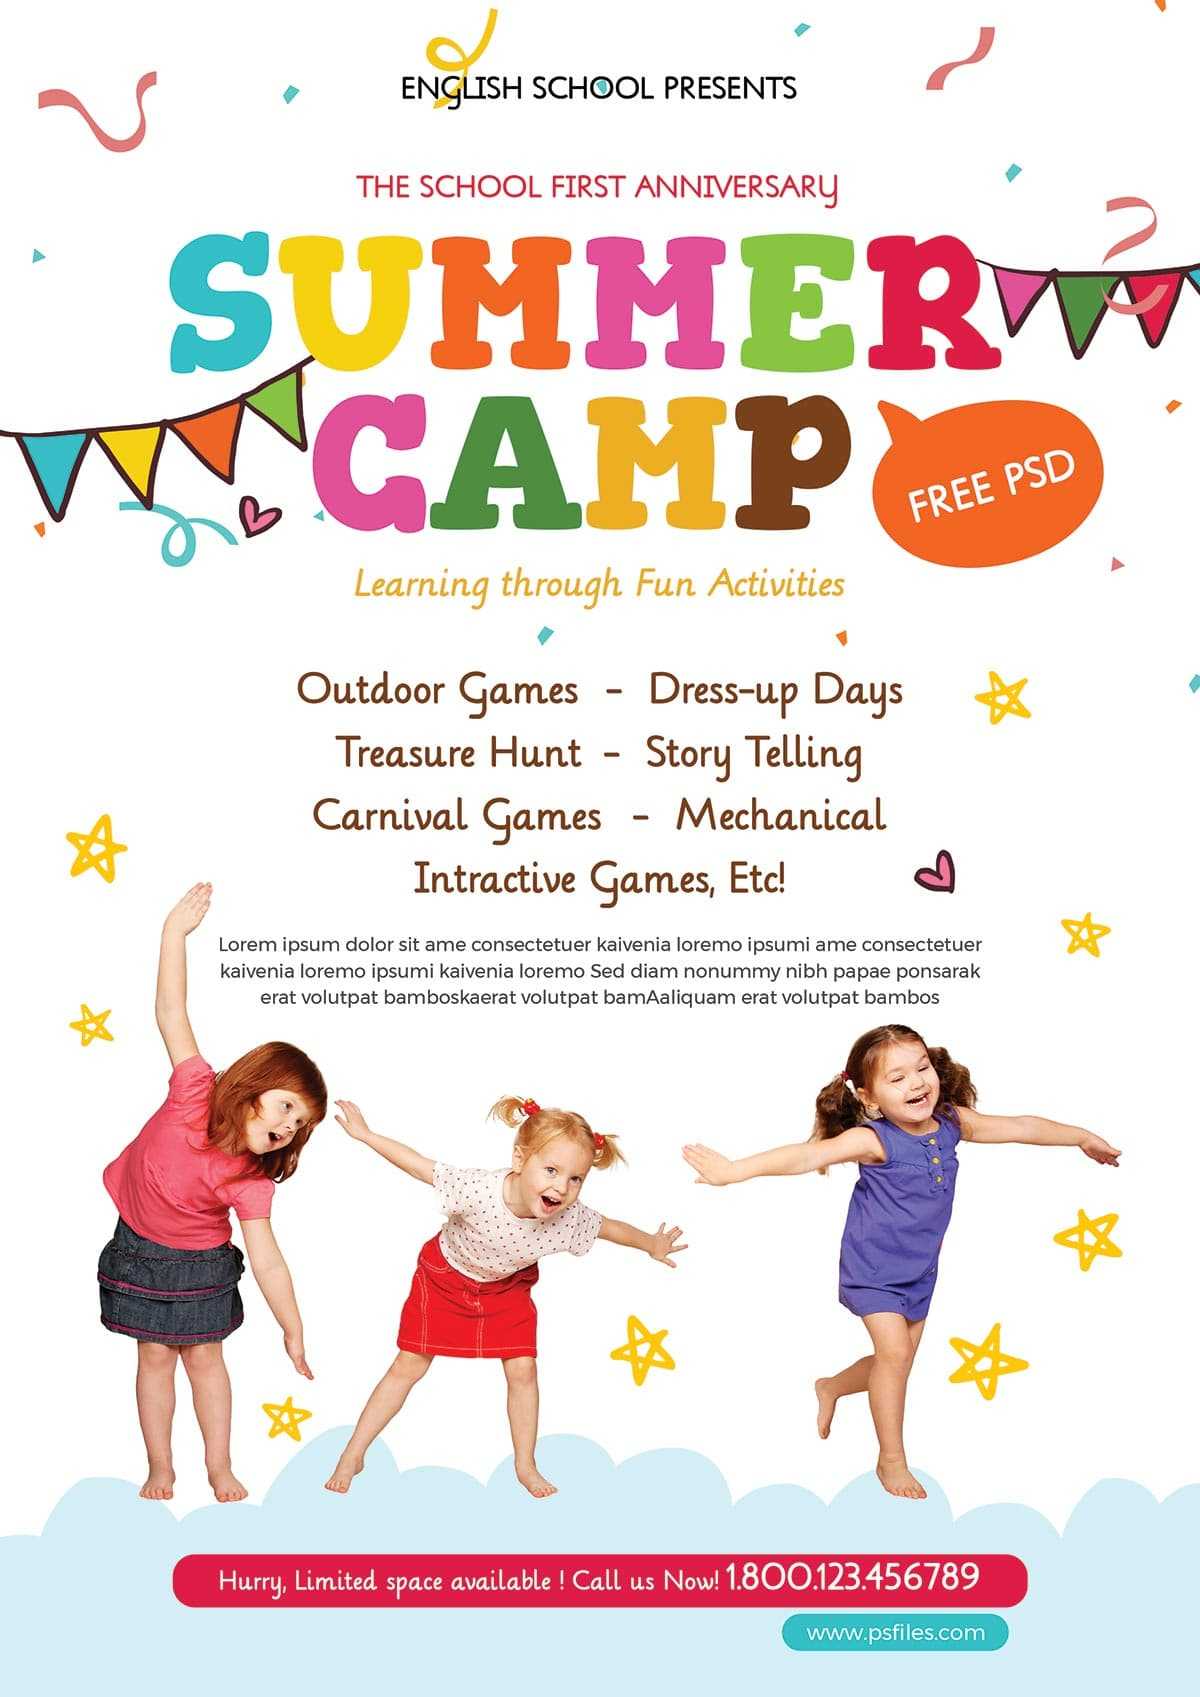 Kids Summer Camp Party Free Psd Flyer Template - Stockpsd Within Summer Camp Brochure Template Free Download